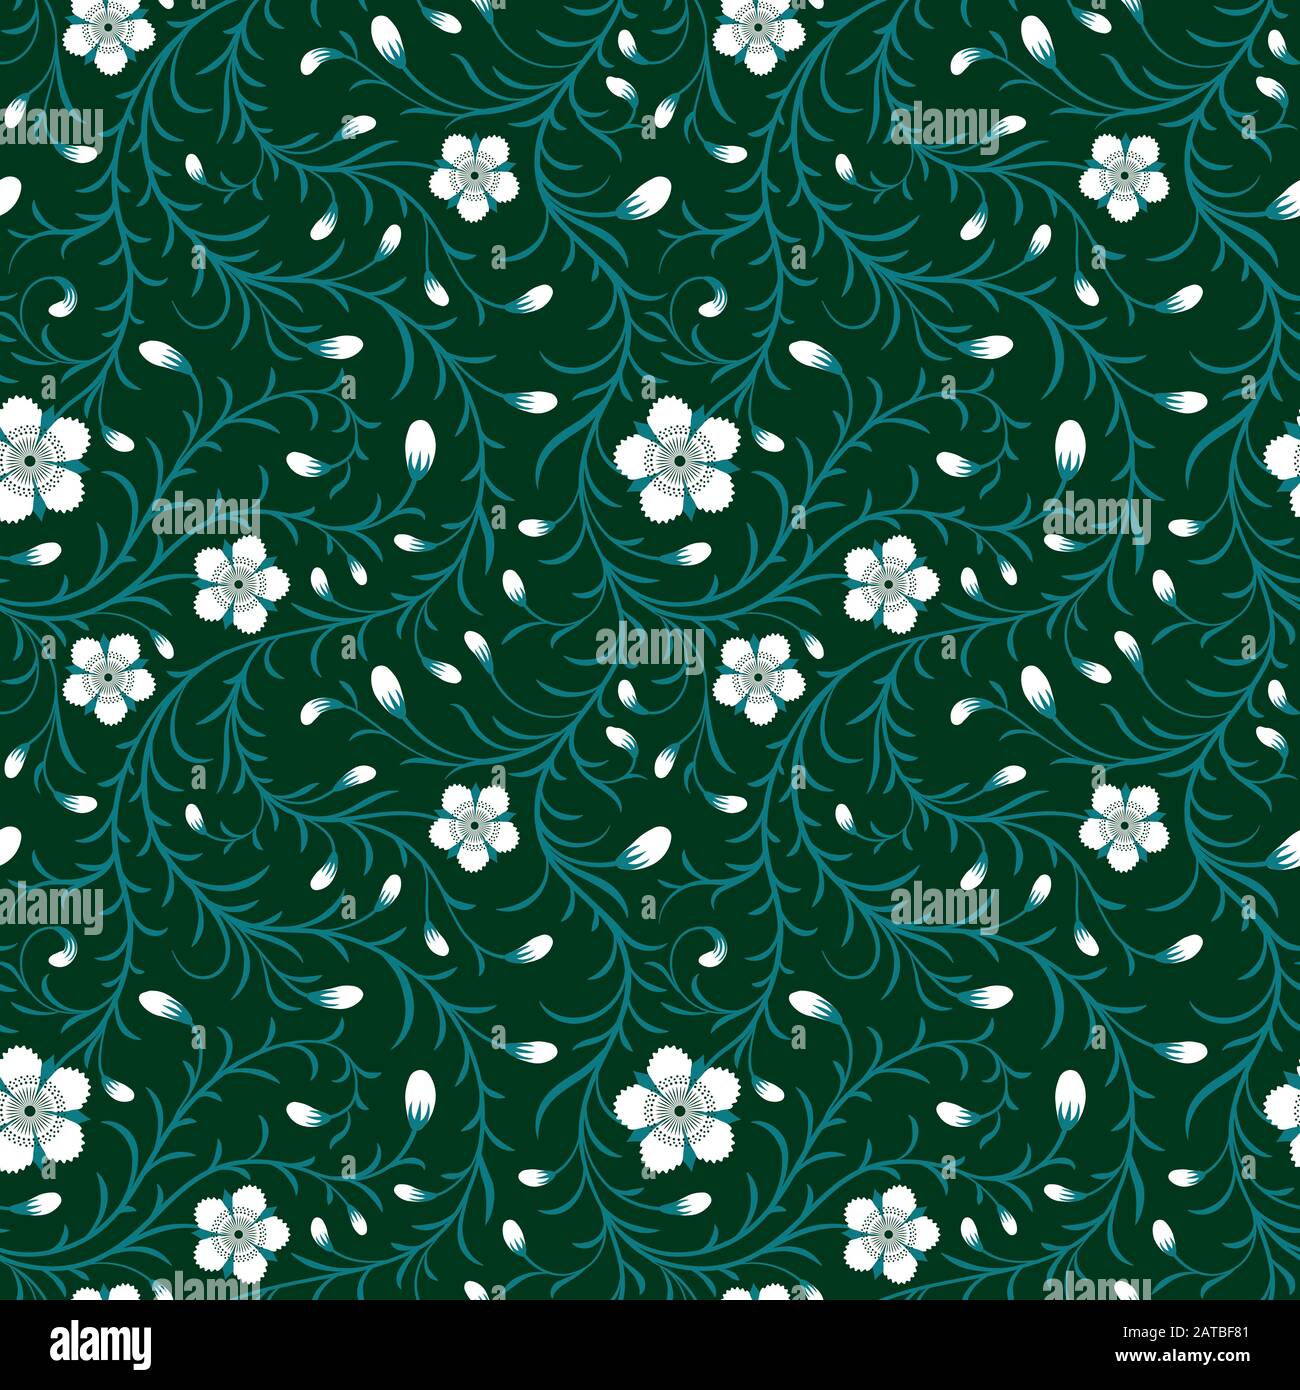 Seamless white floral pattern on green background Stock Vector